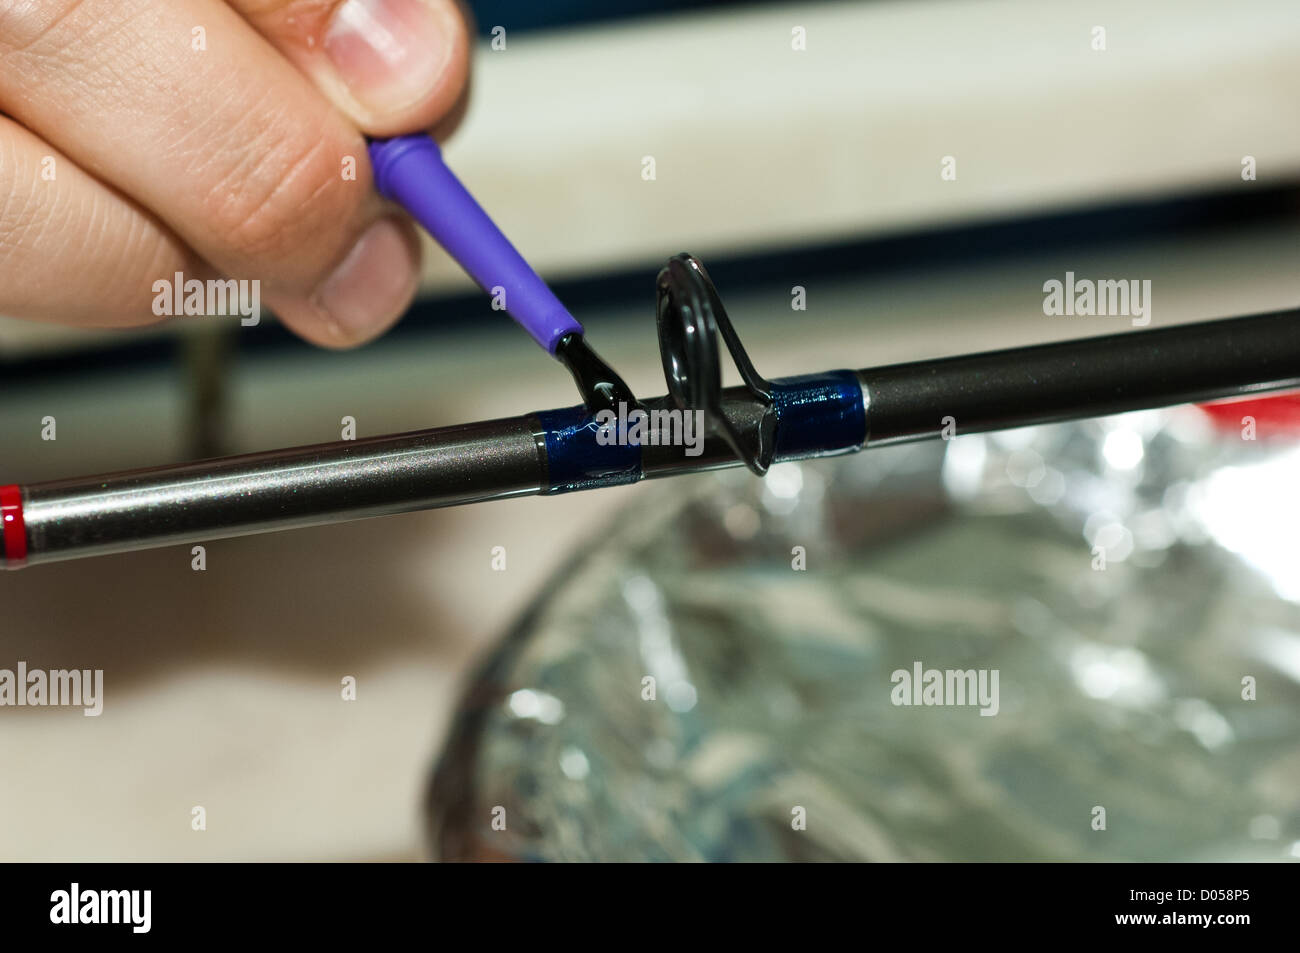 Fishing rod builder painting epoxy glue over thread wraps to secure the rod  guide Stock Photo - Alamy